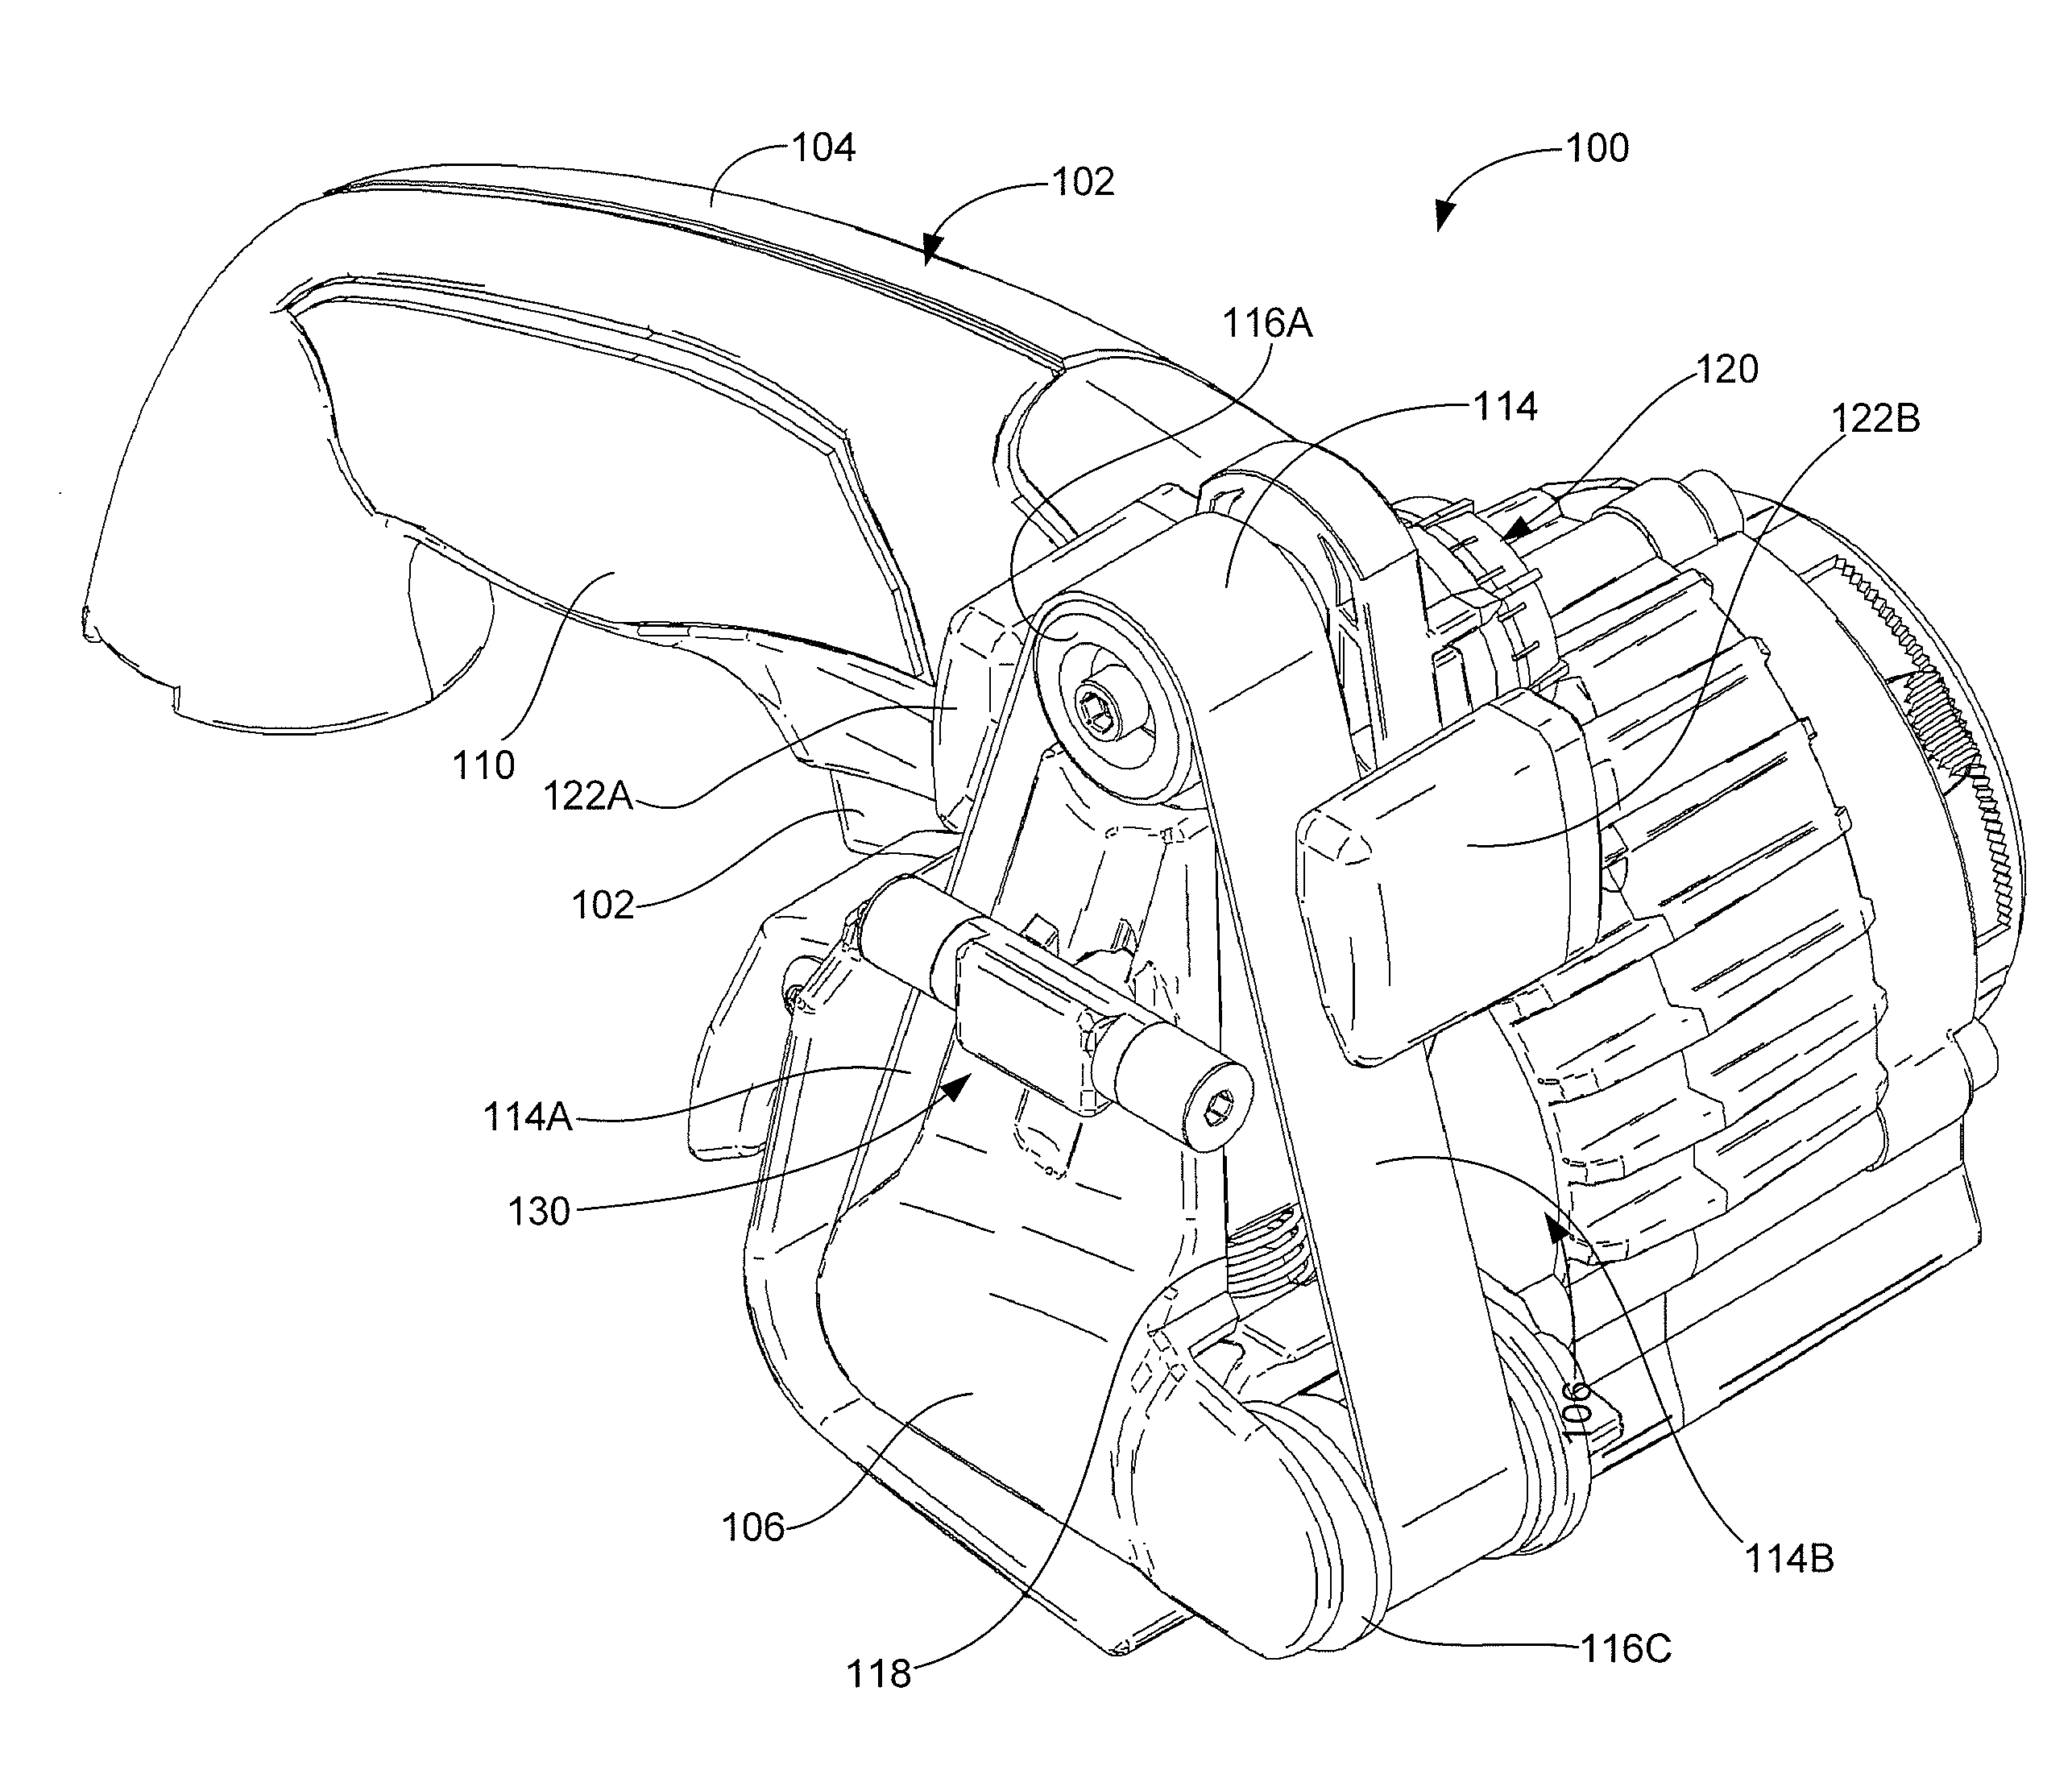 Selectively Deployable Rotatable Edge Guide to Support a Cutting Tool During a Sharpening Operation